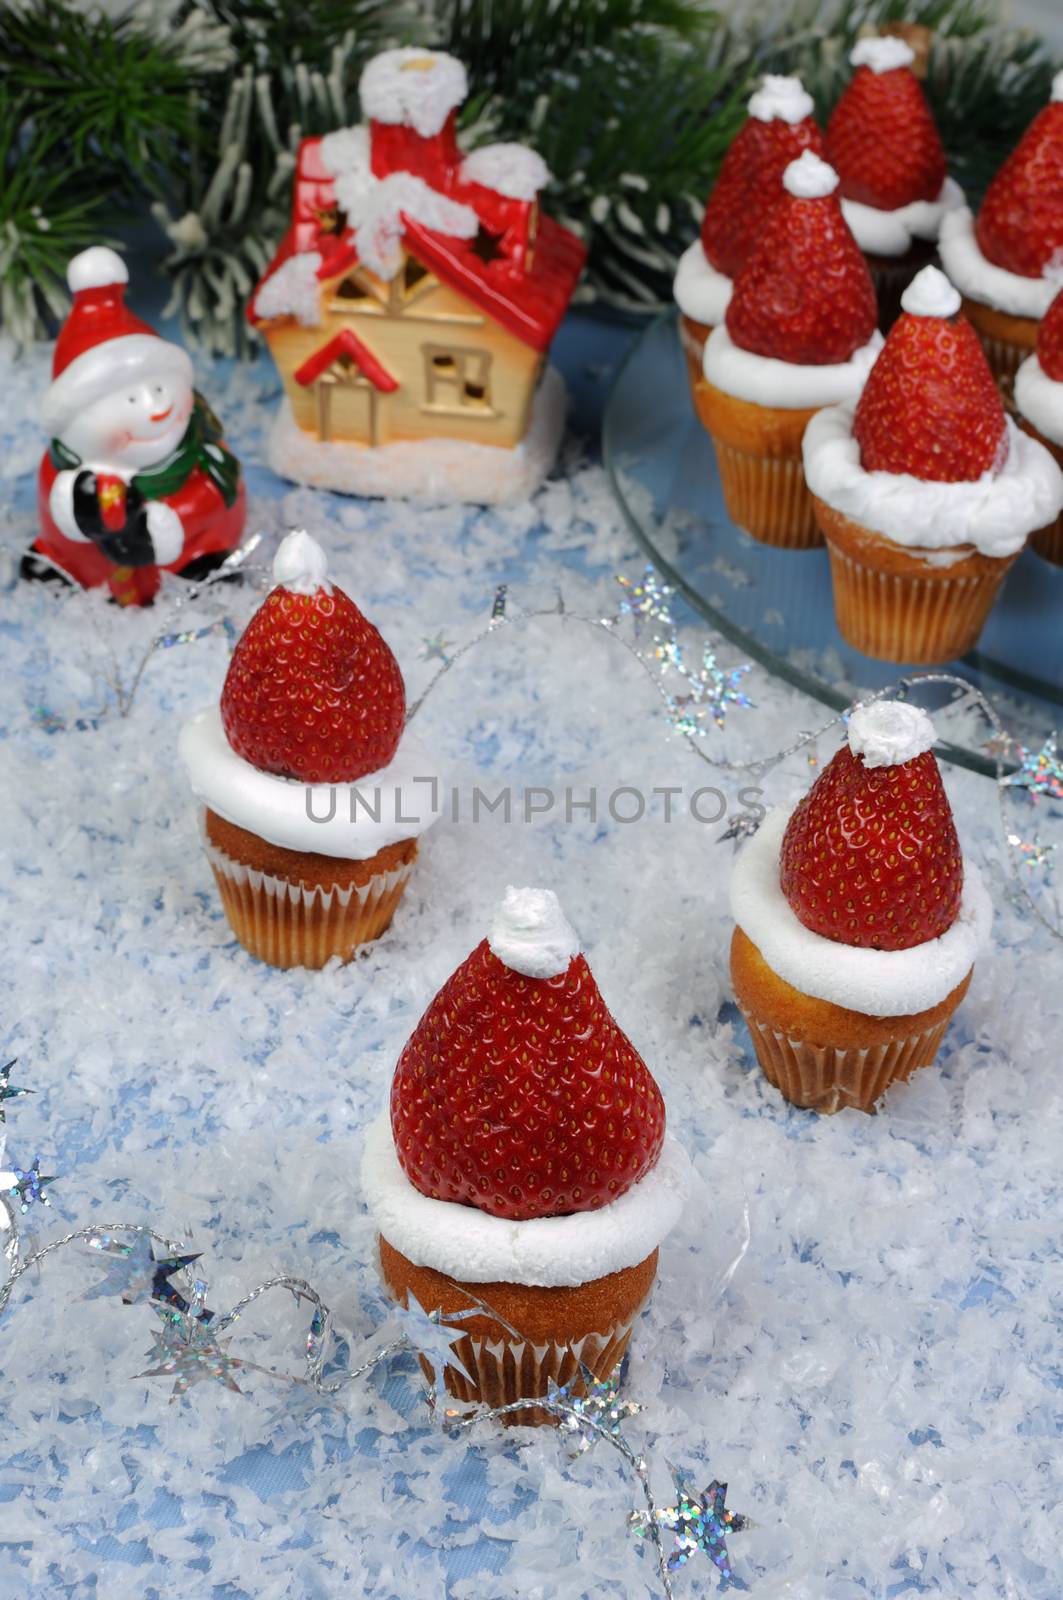 Christmas muffins by Apolonia